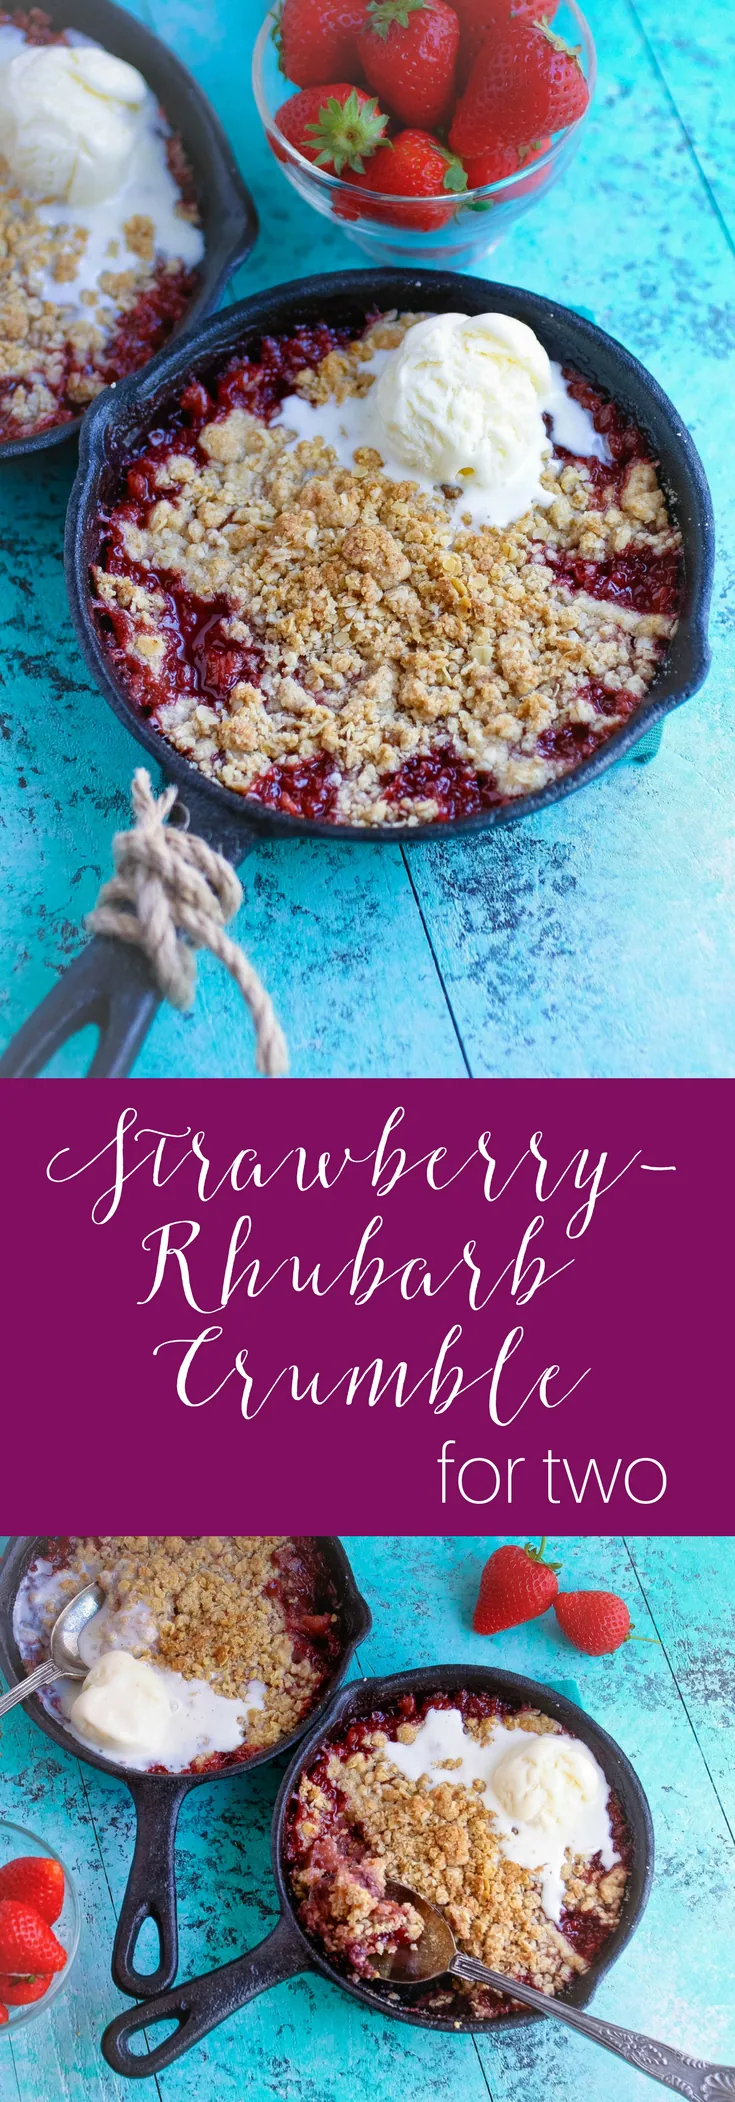 Strawberry-Rhubarb Crumble for Two is a fun treat for the season!